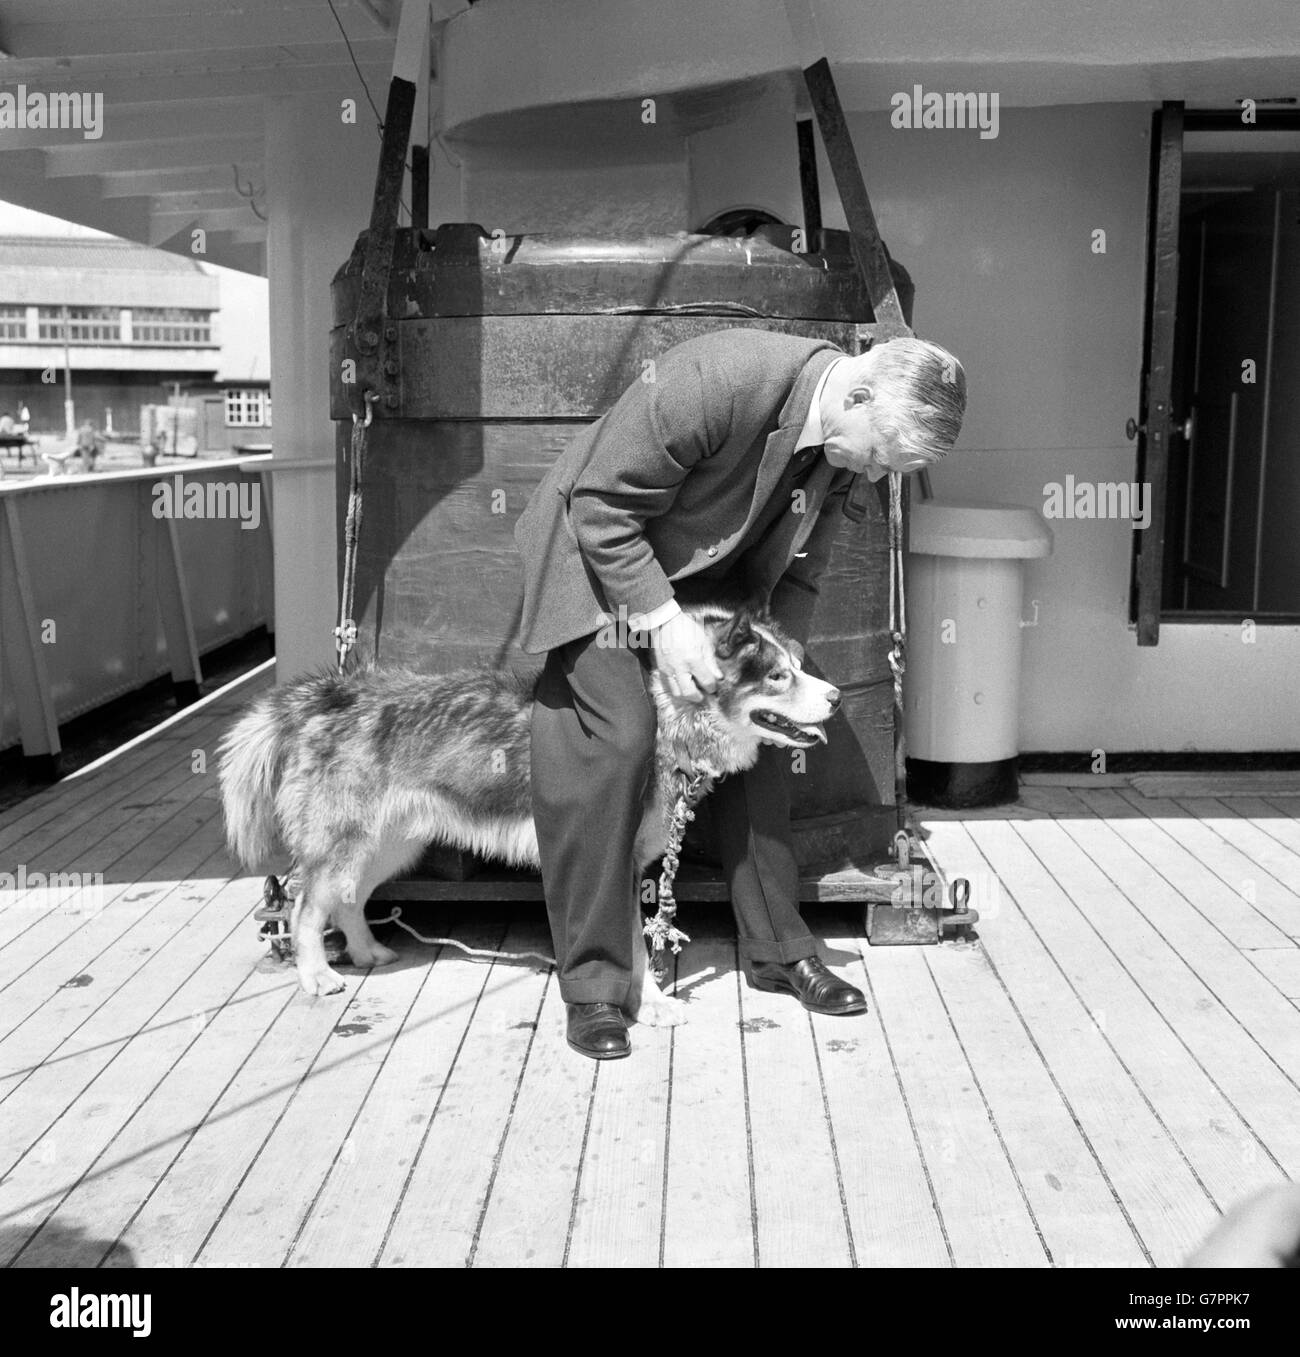 Sir Vivian Fuchs, Director of the British Antarctic Survey, is shown aboard the RRS John Biscoe on it's arrival at Southampton making friends with Halignant, known as Malig, a husky. Sir Vivian was on hand to greet the ship bringing home 19 members of the Survey who have spent up to two years in Antarctica. Malig, has been brought back by Mr Bellars, the ship's veterinary surgeon, who has been examining the dog population at various bases. Malig is thought to be suffering from a form of haemophilia. The dog will be studied while in quarantine to determine the precise nature of the condition, Stock Photo